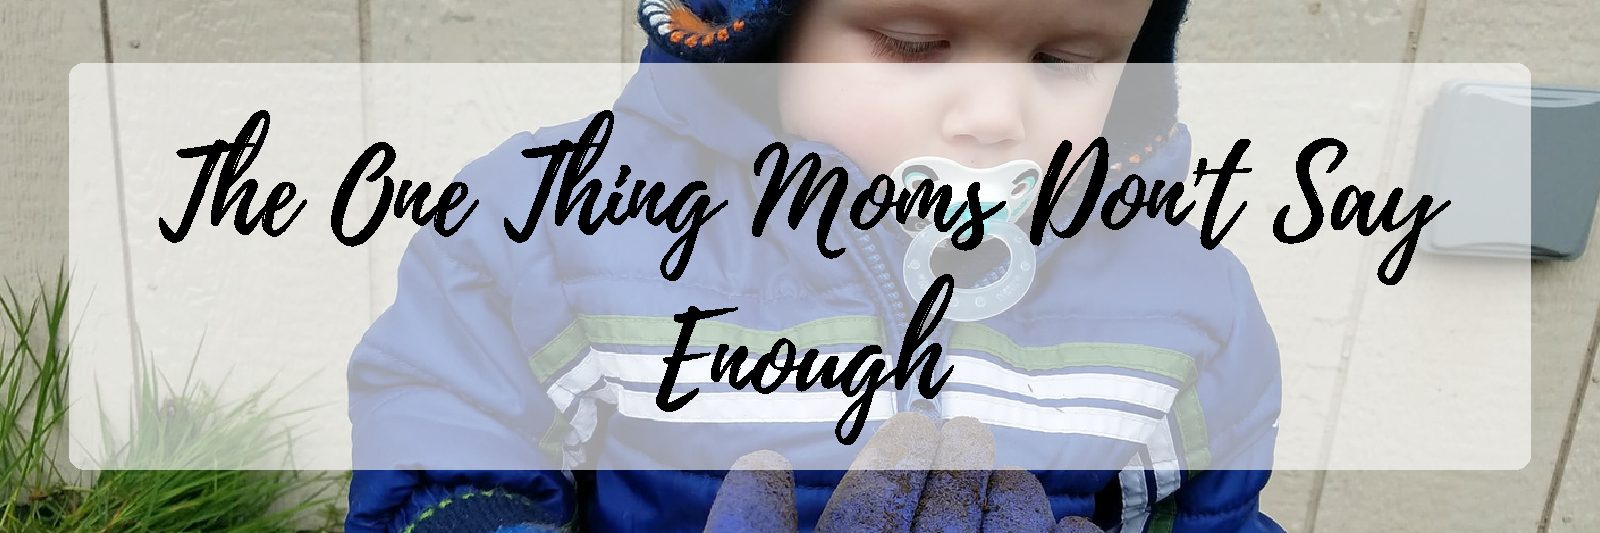 The One Thing Moms Aren’t Saying Enough